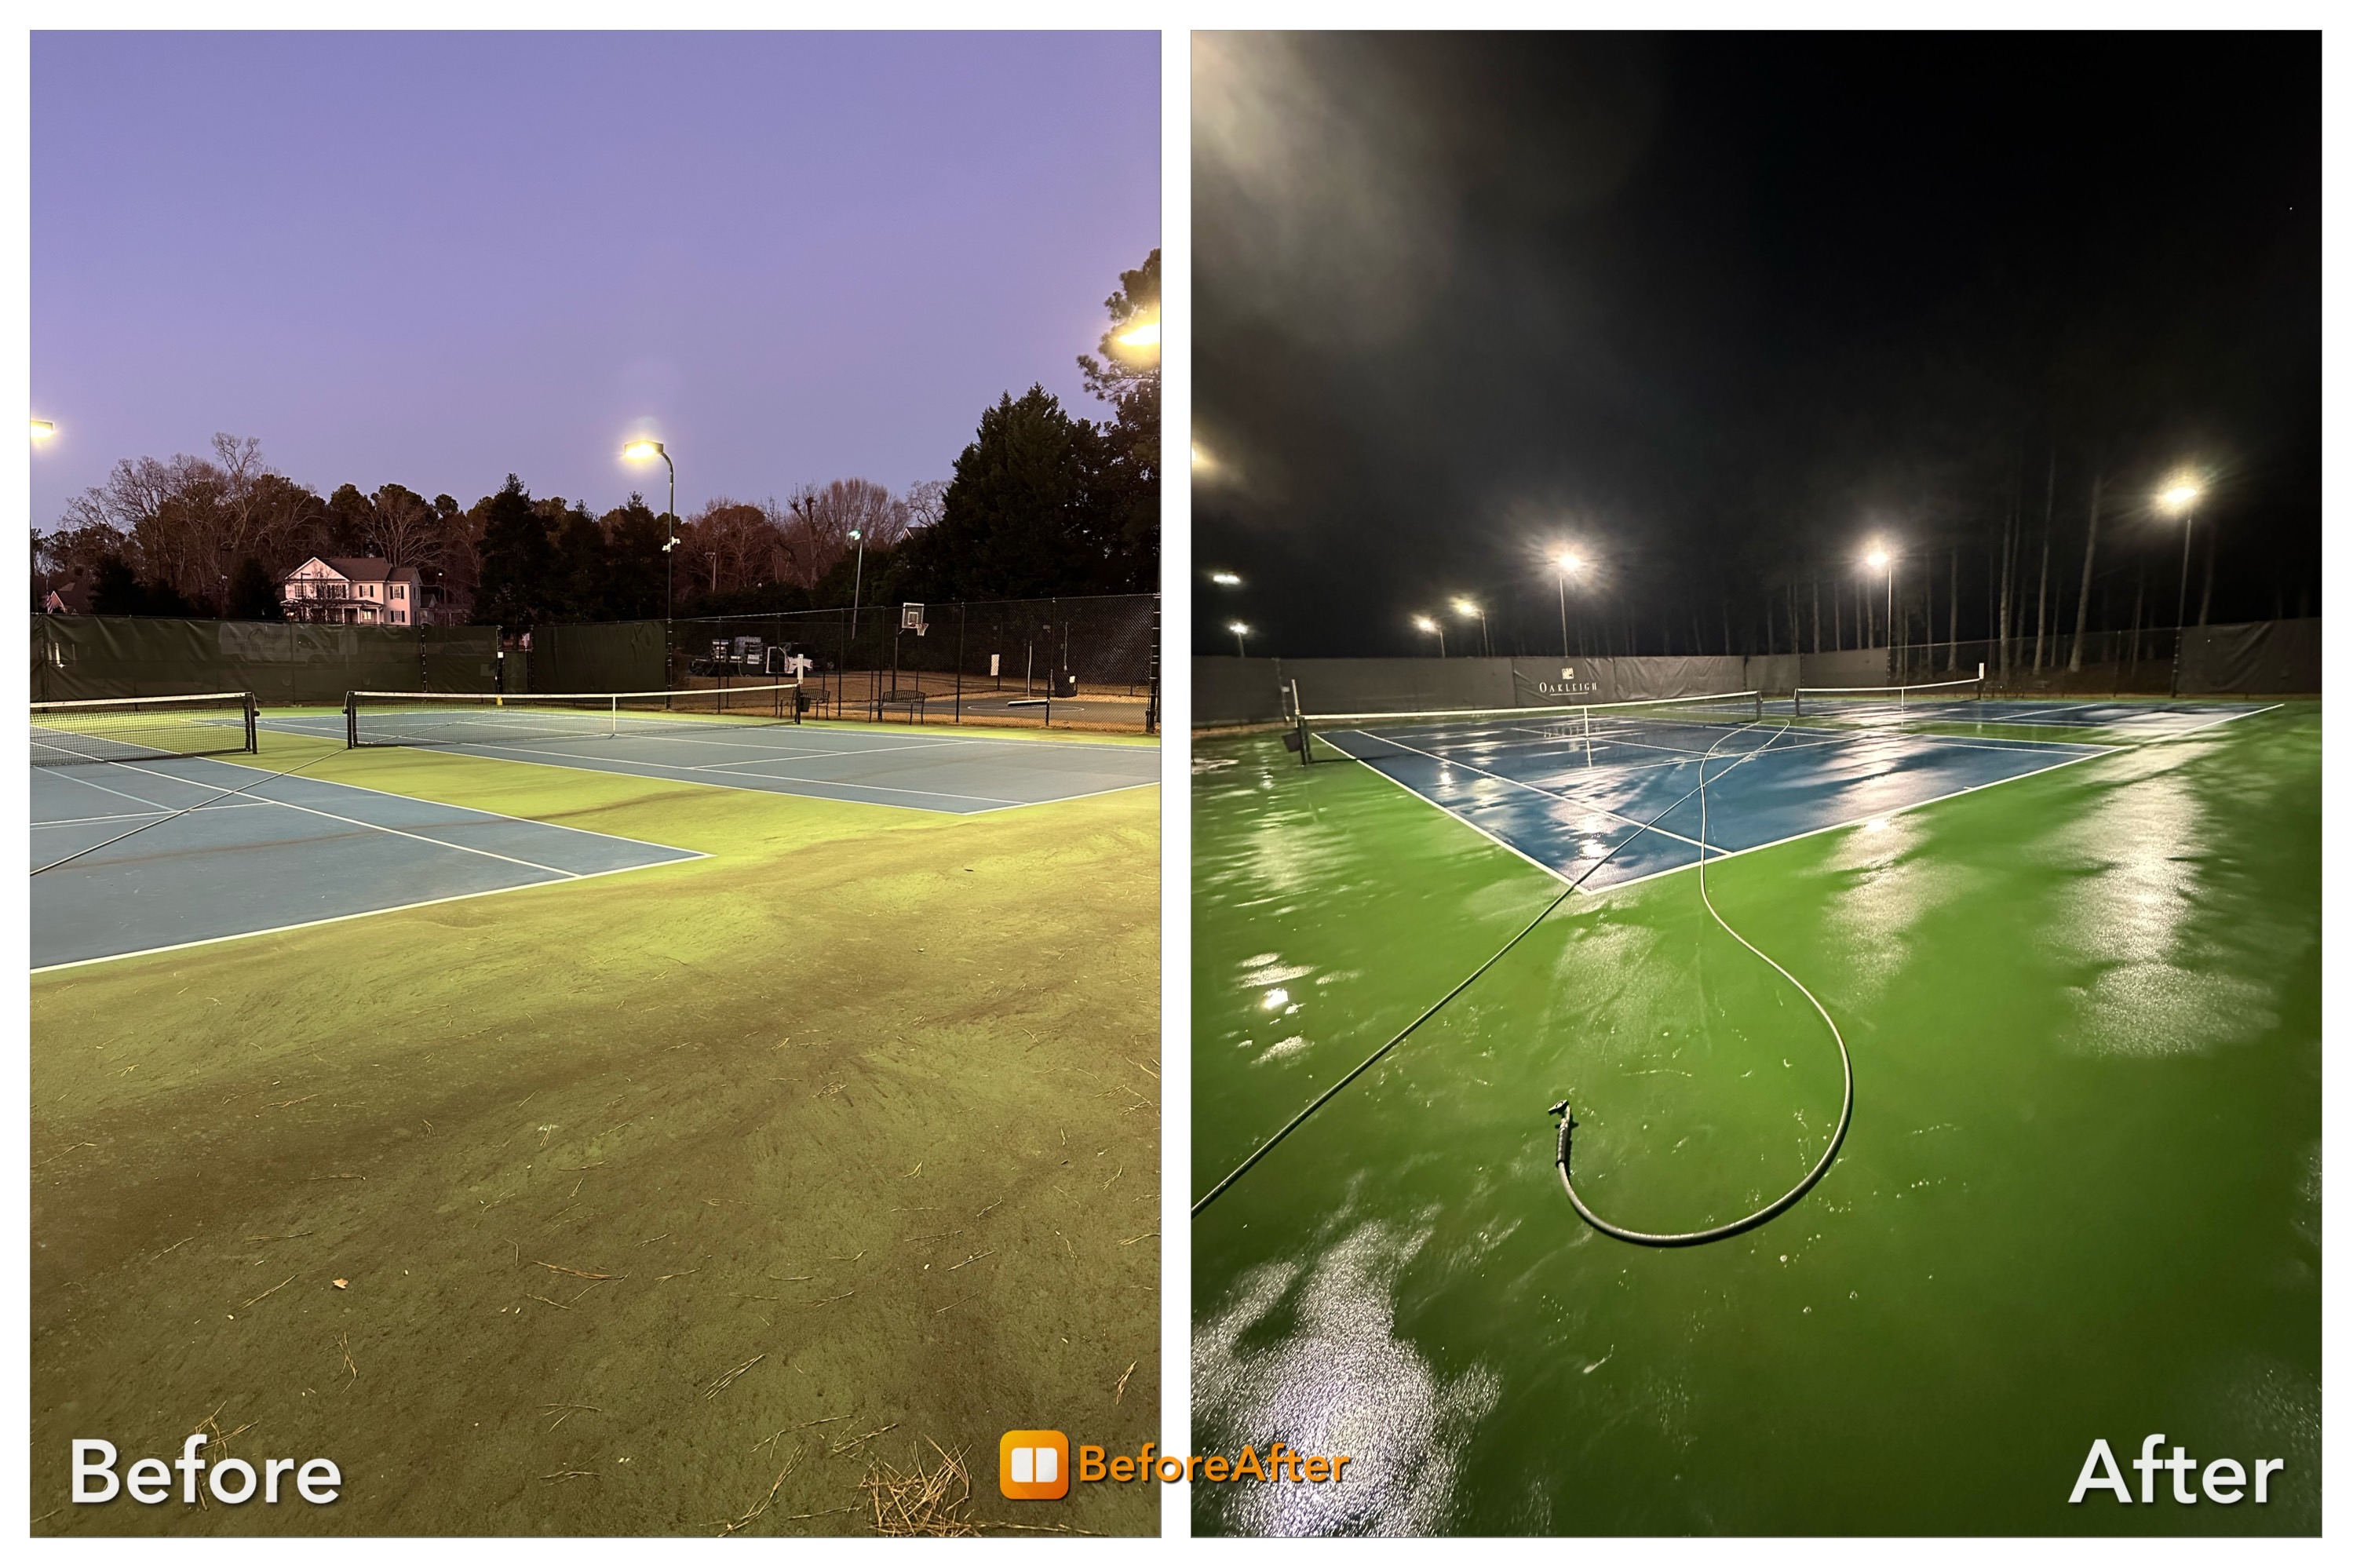 Hot Water Used to Soft Wash Tennis Courts